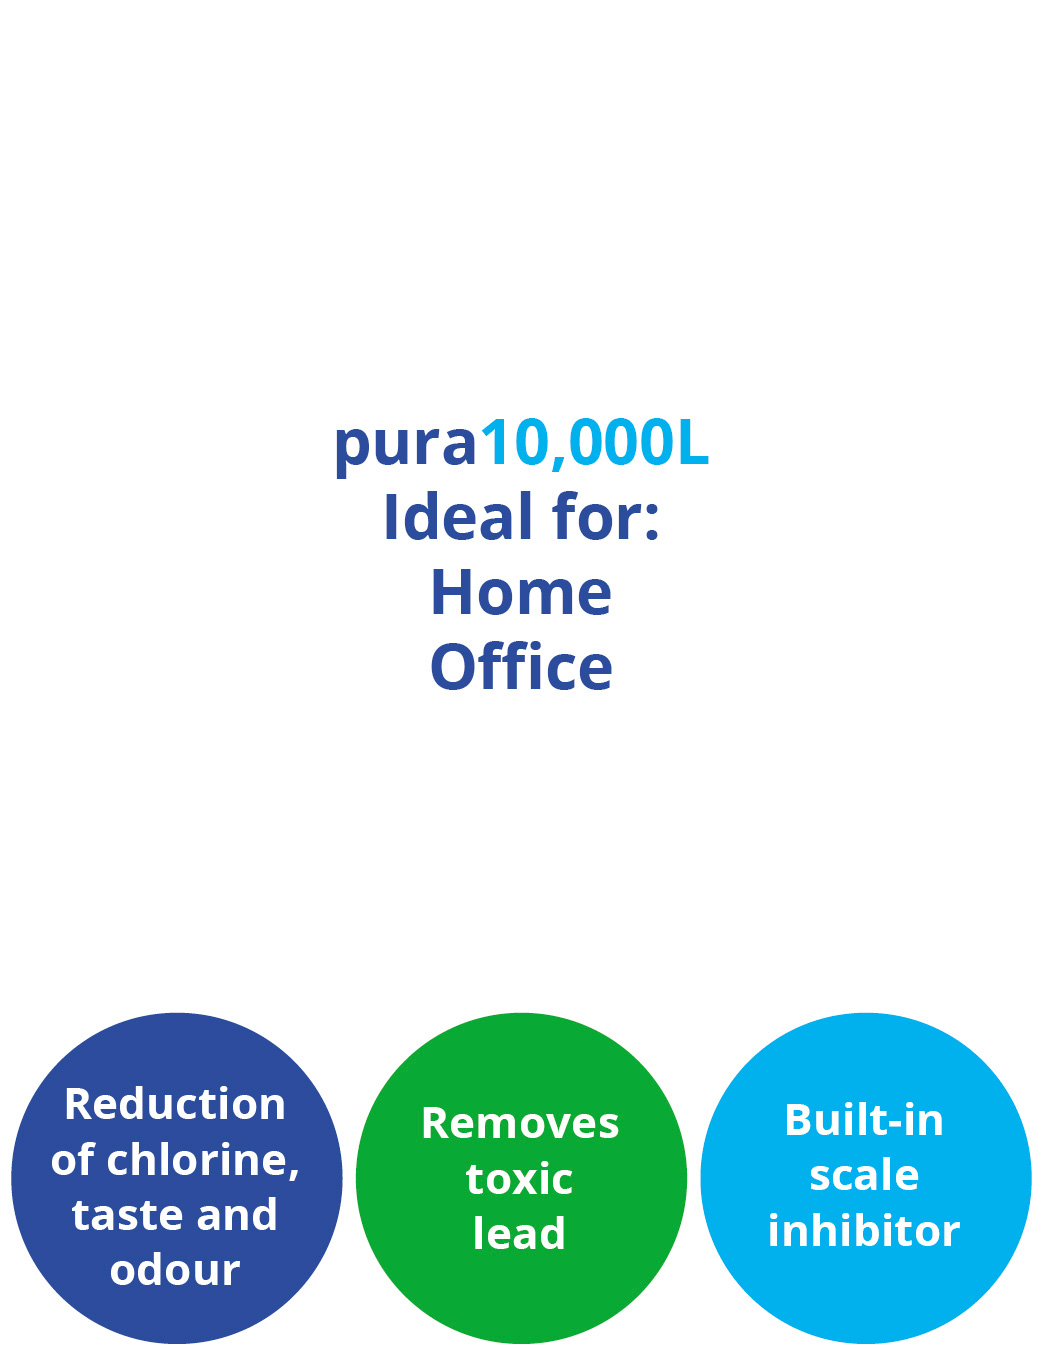 pura10,000L Advanced Water Filter for lead removal